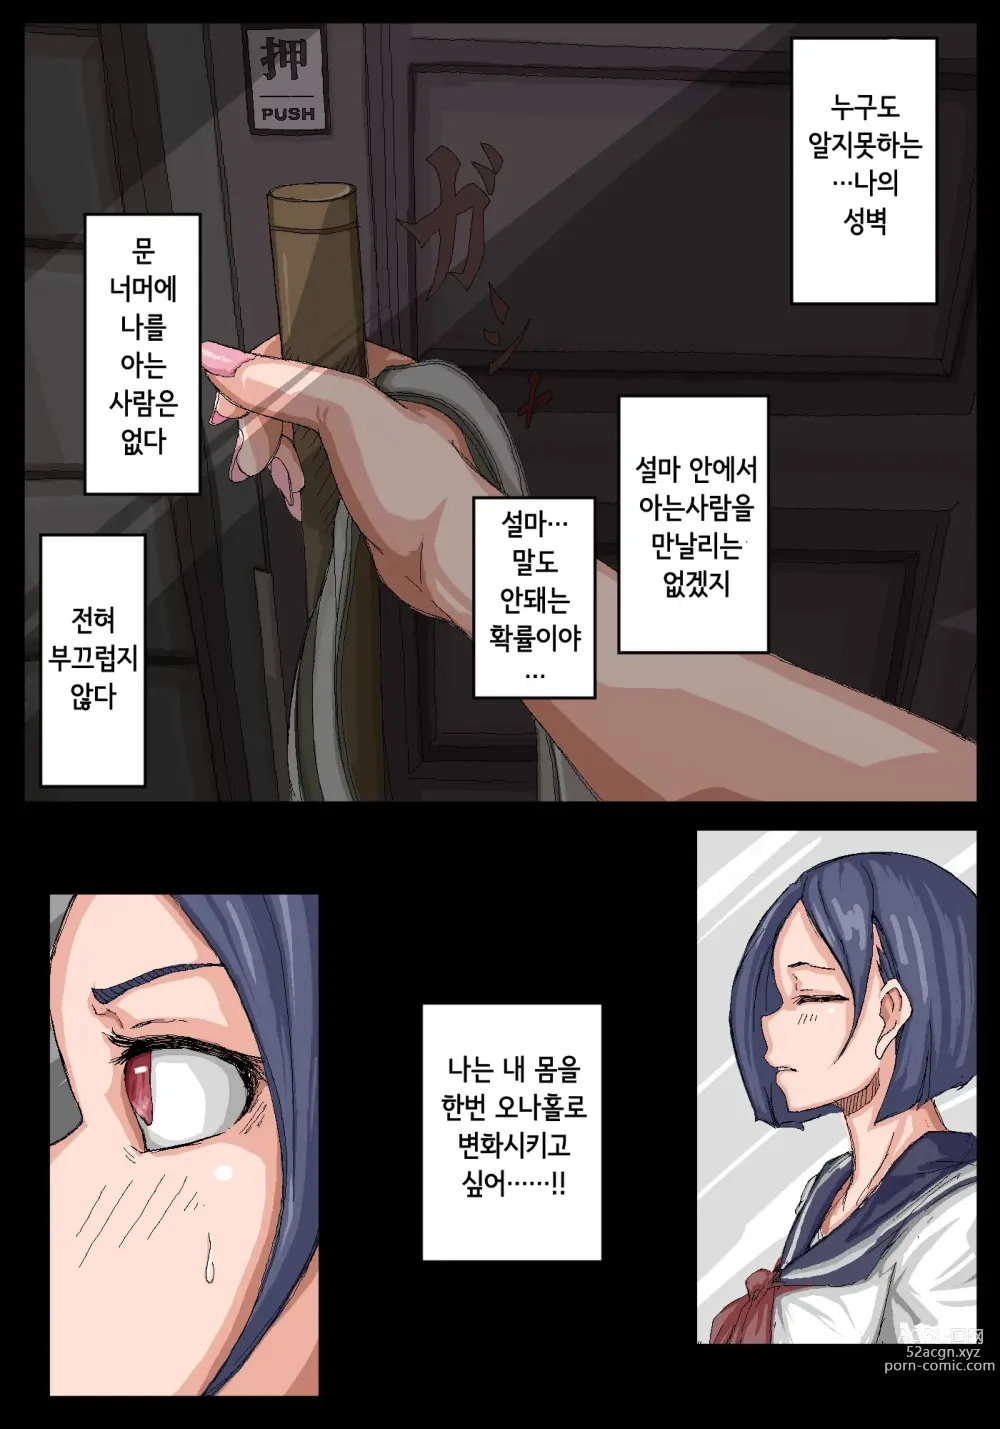 Page 3 of doujinshi 오나홀 선배